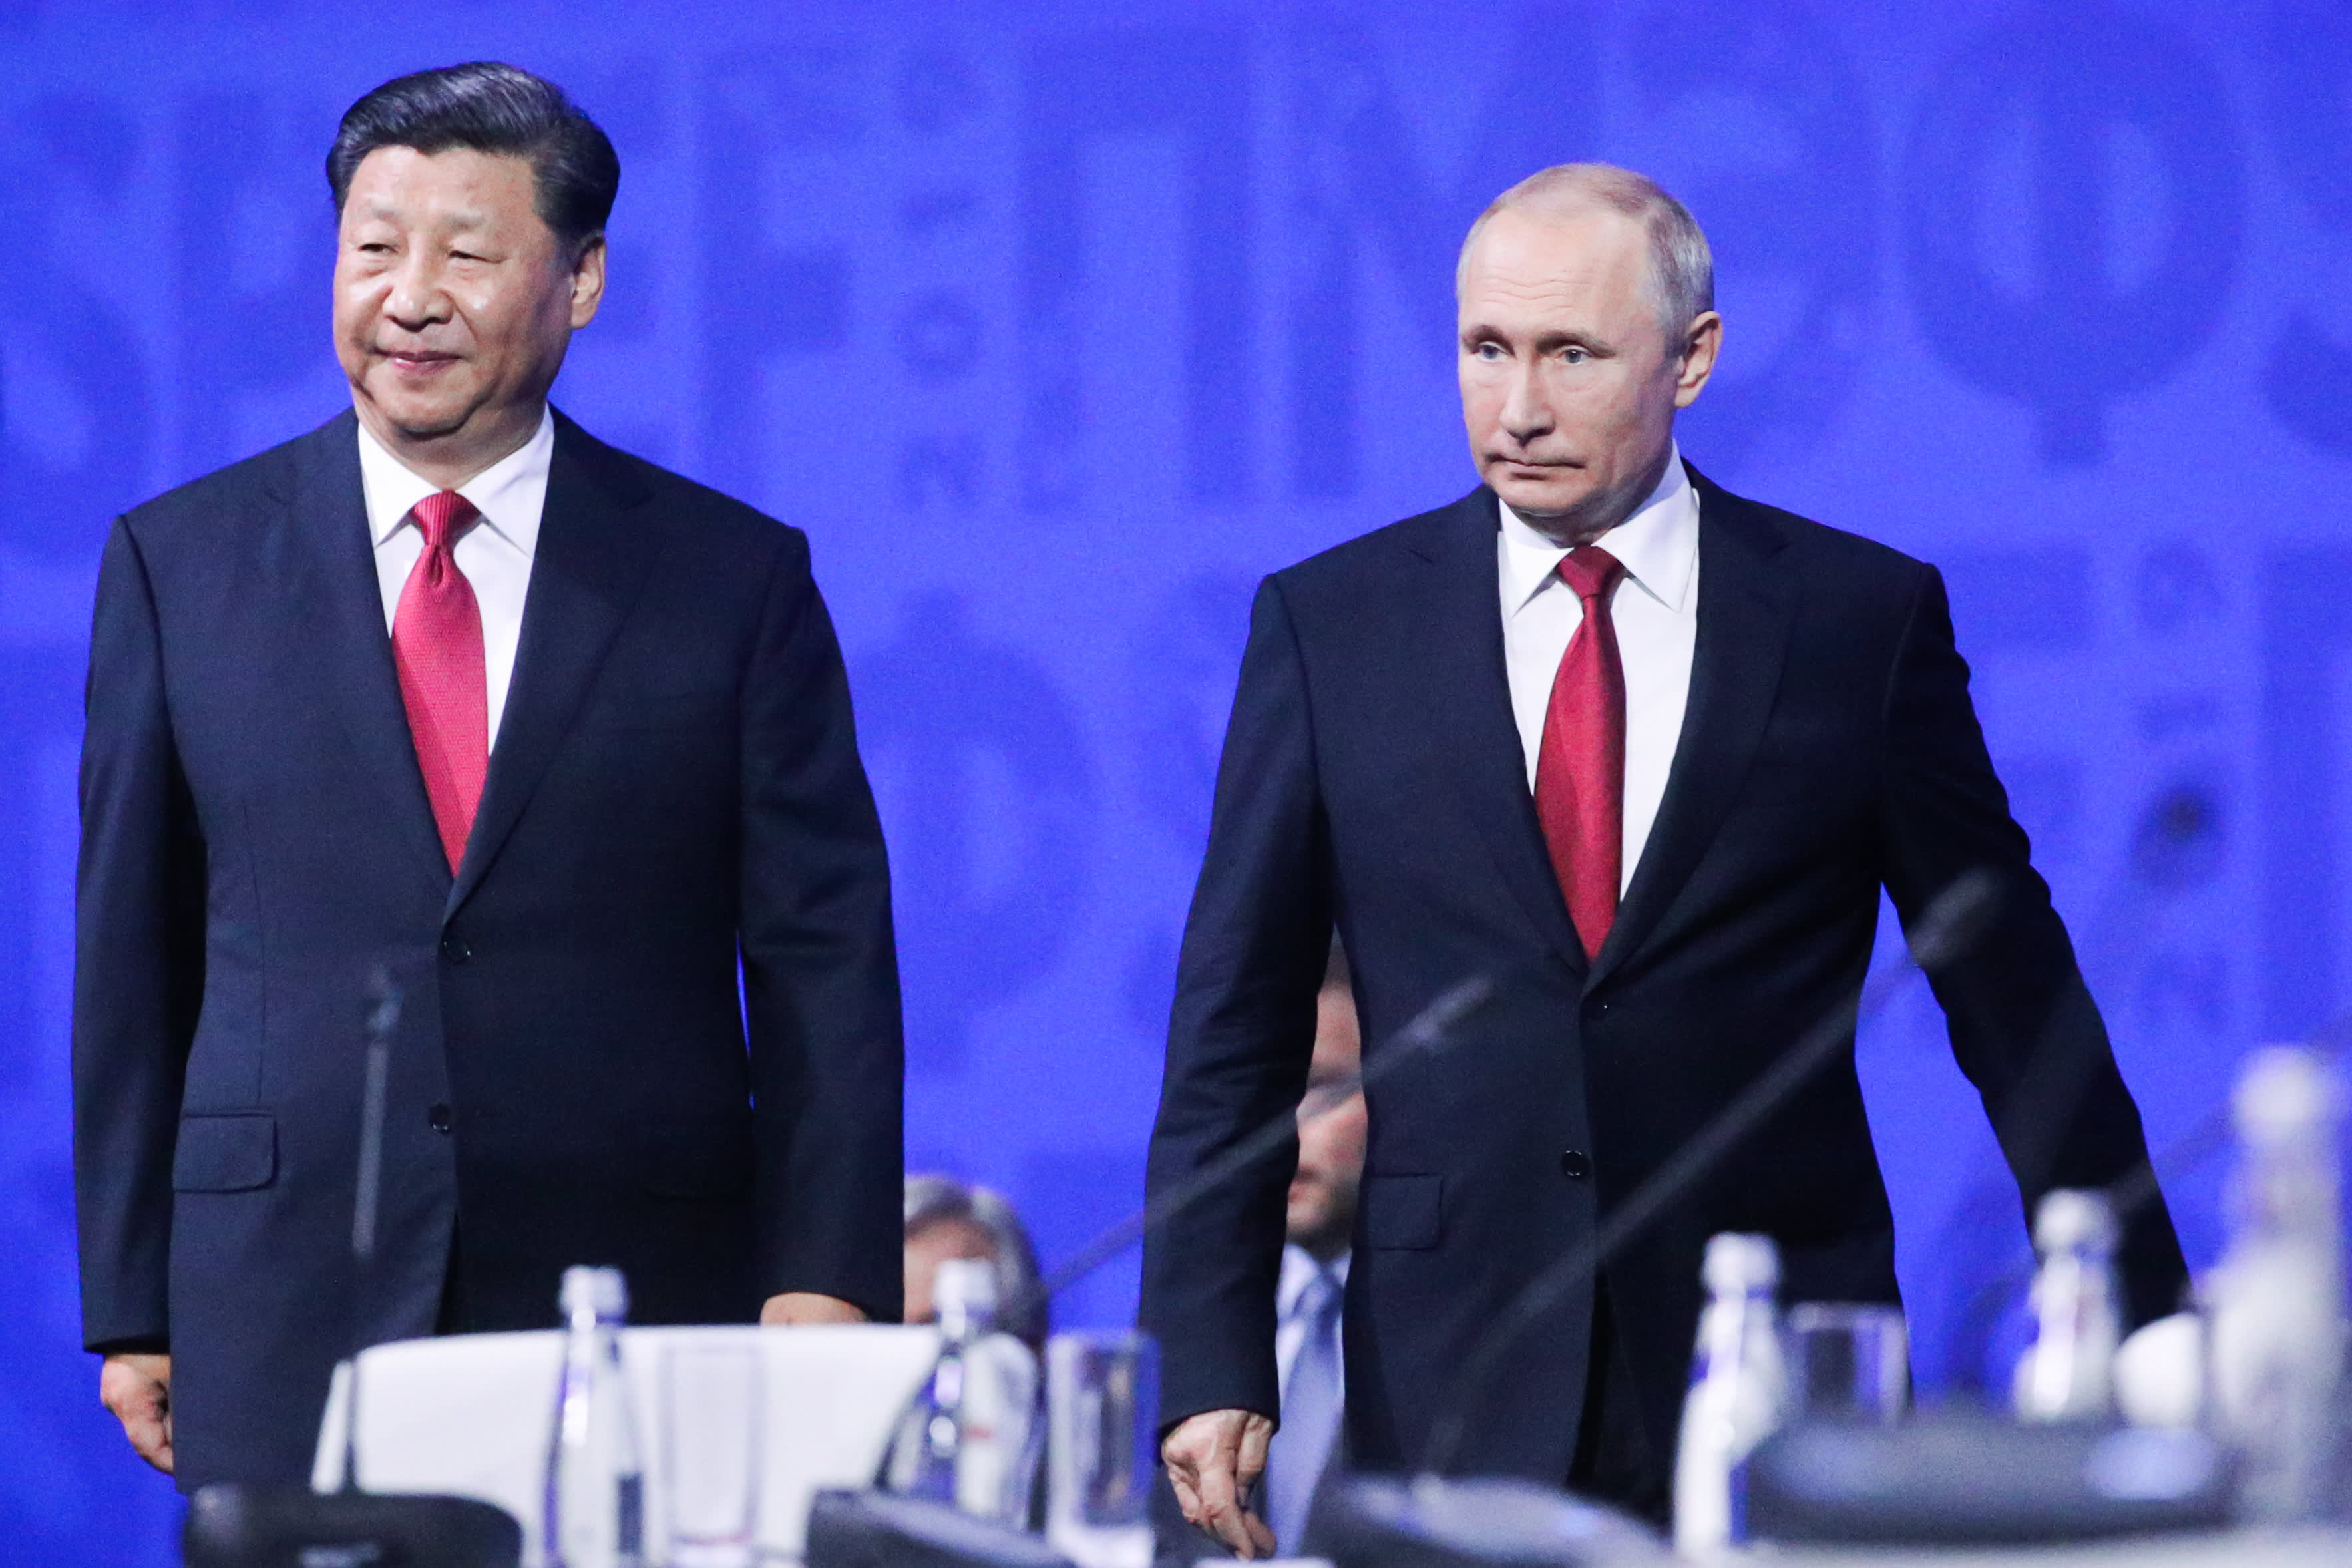 Cooperation between China and Russia could be Biden’s biggest challenge